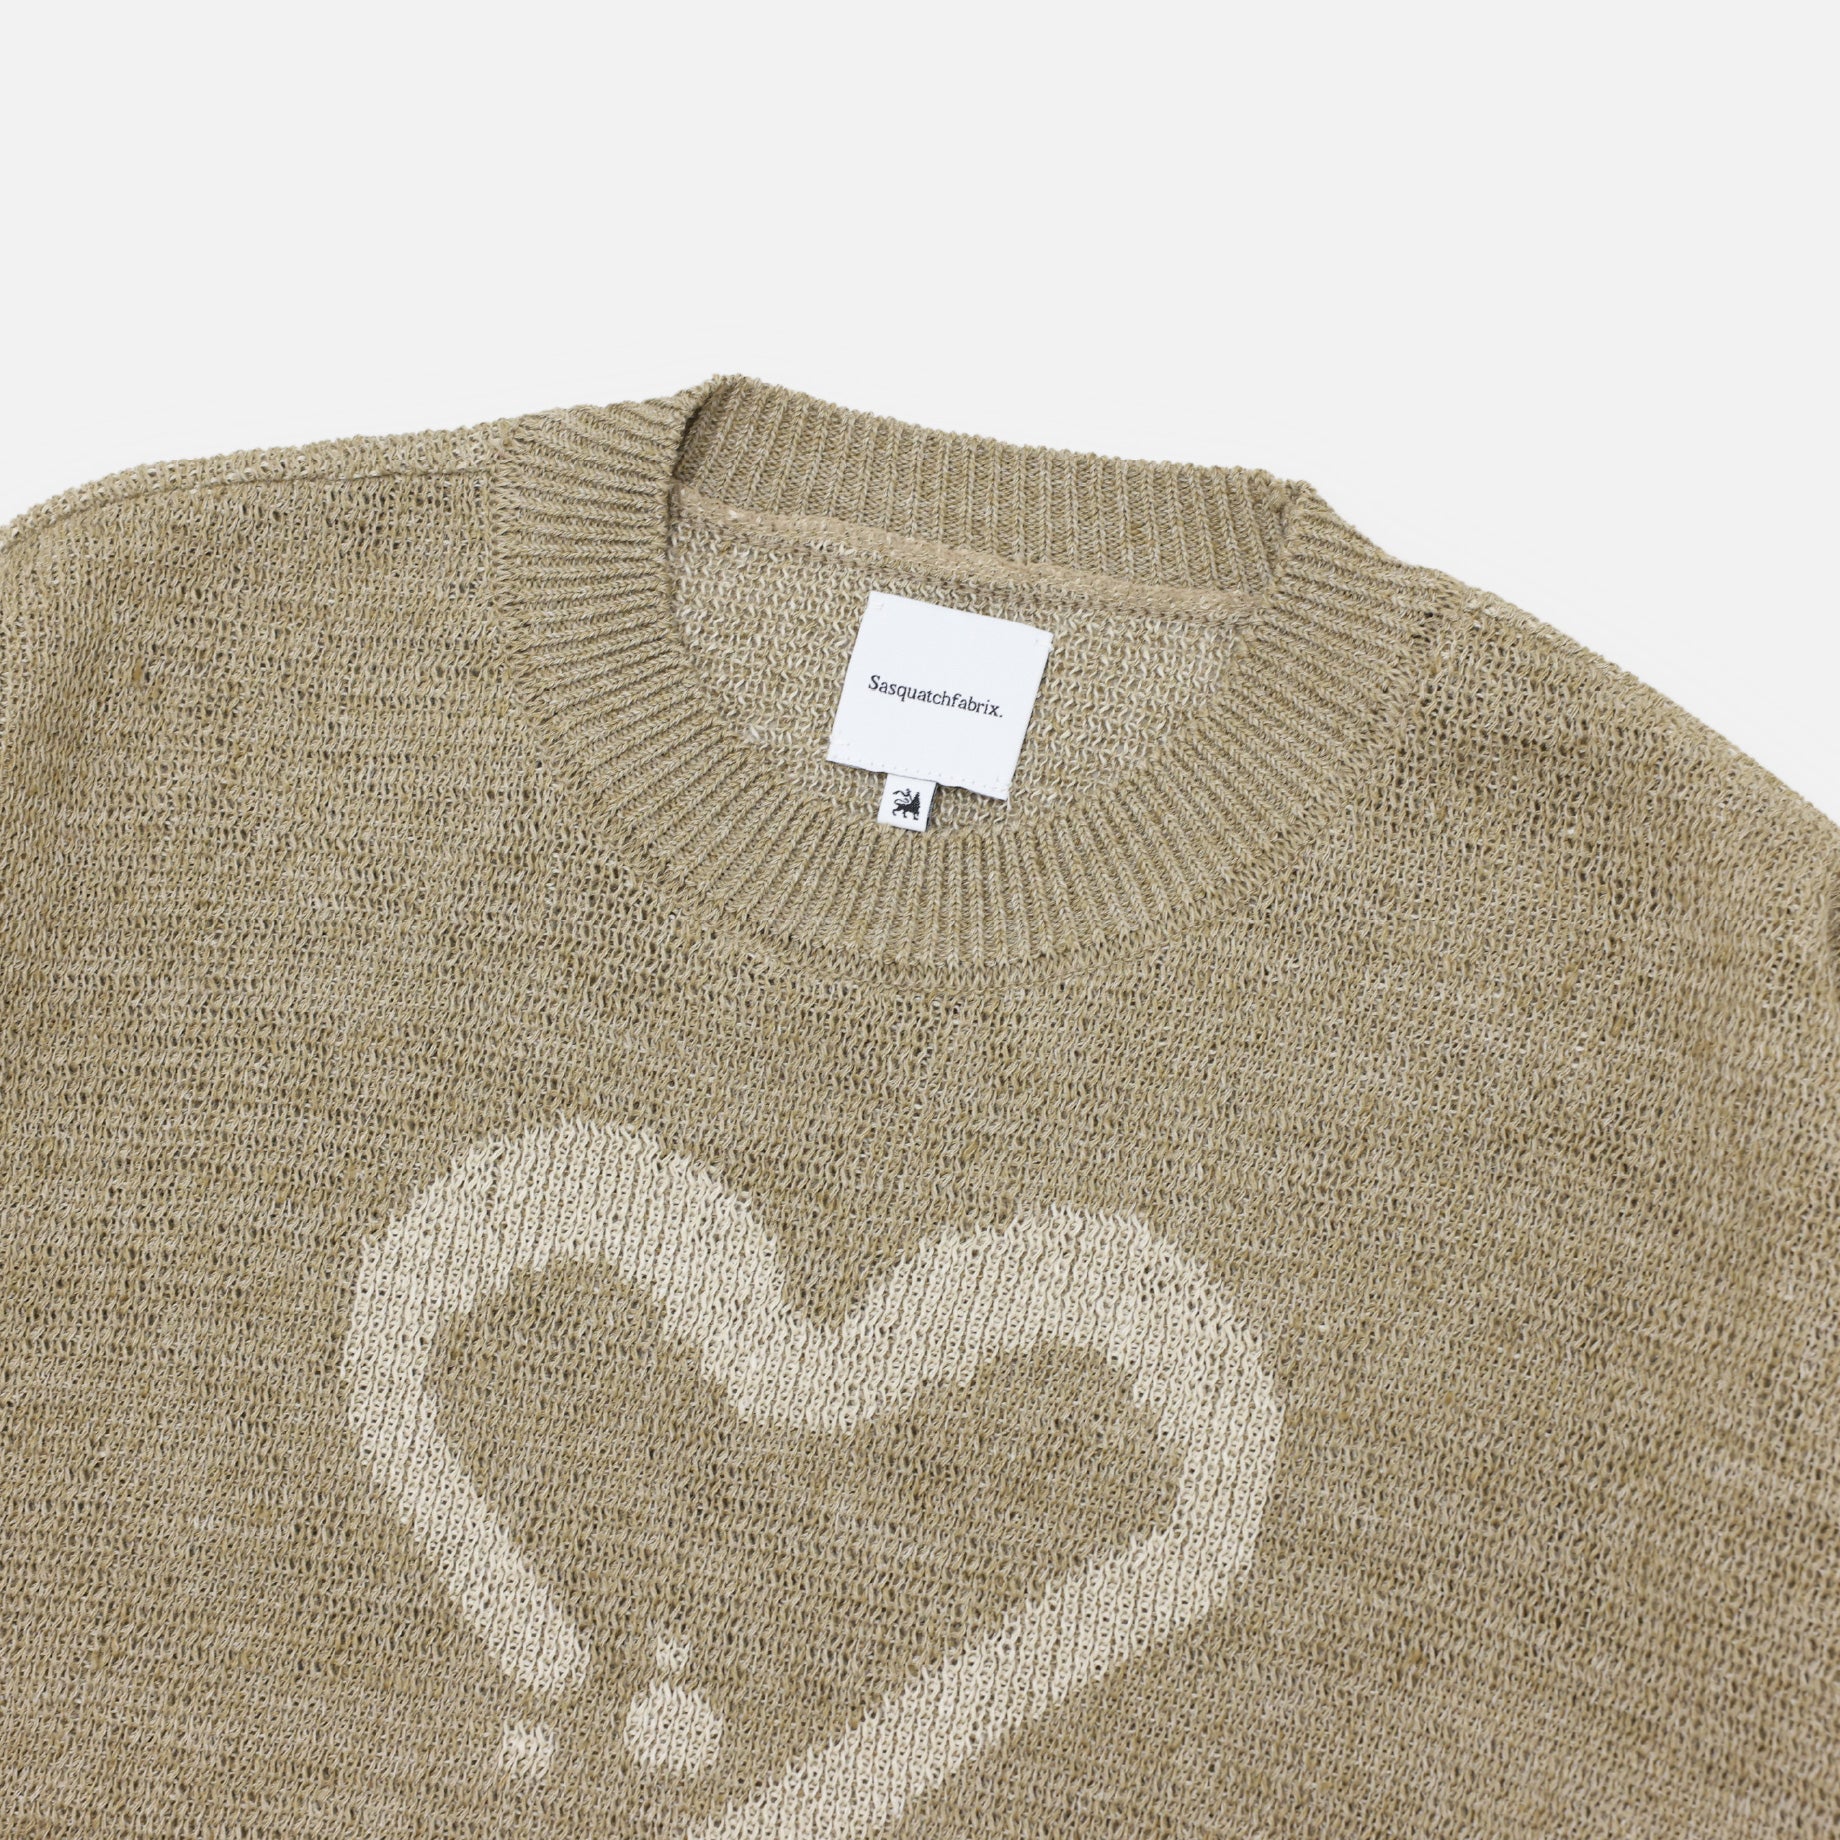 CALLIGRAPHIC “LOVE & PEACE” KNIT（BEIGE）